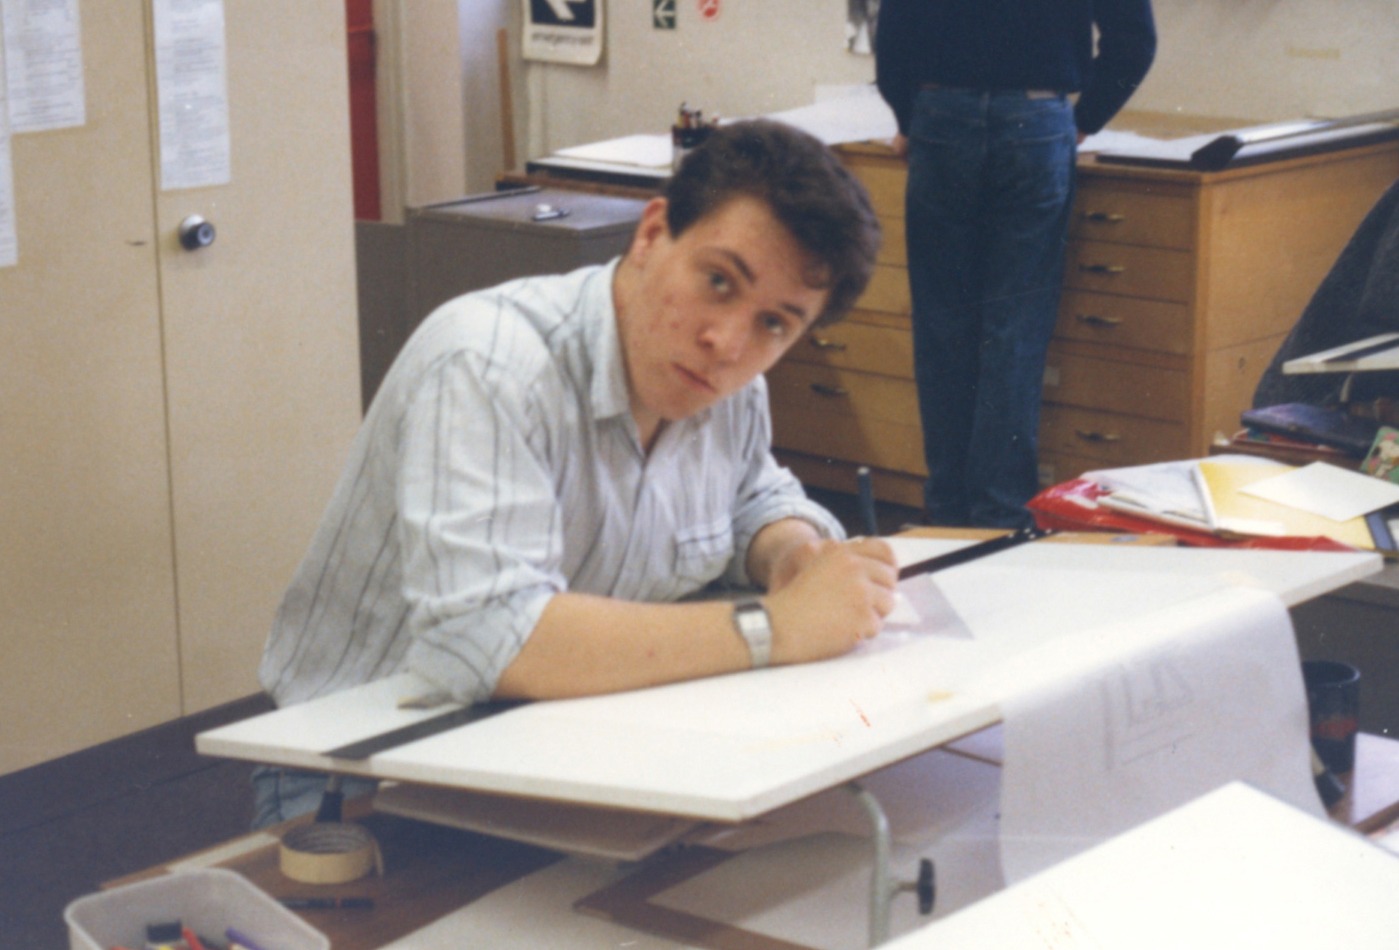 Rob has been working in design since the 1980s.